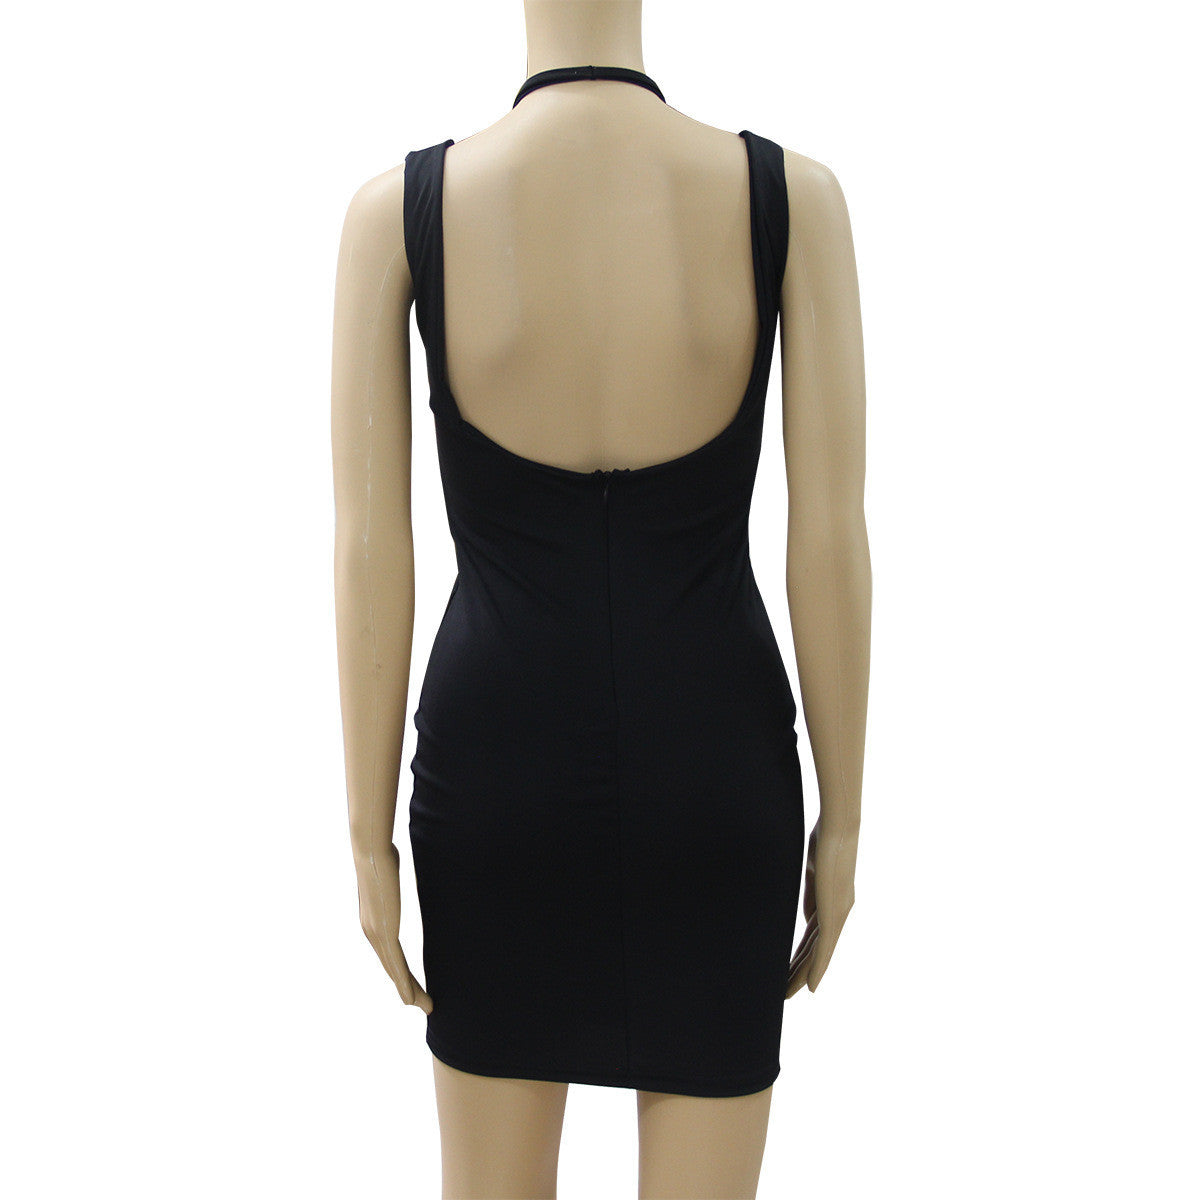 Sexy Cross Black Short Backless Bodycon Dress - Oh Yours Fashion - 8